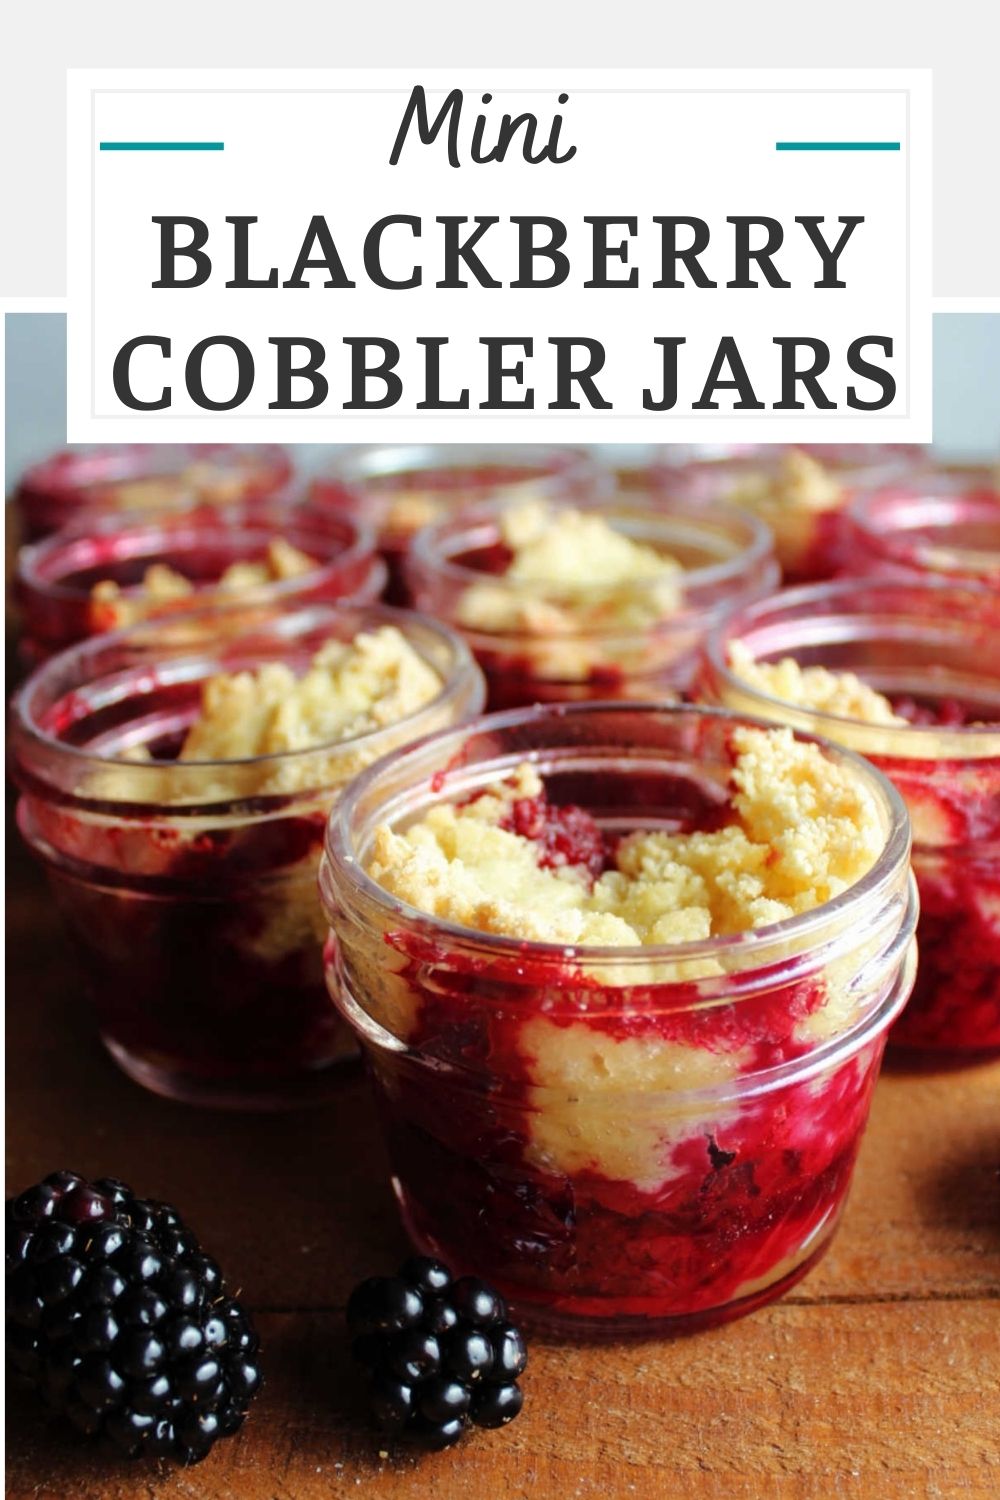 Bake cute mini blackberry cobblers in jars for a fun and portable dessert. Serve it warm with a scoop of ice cream or pack them up for a picnic.